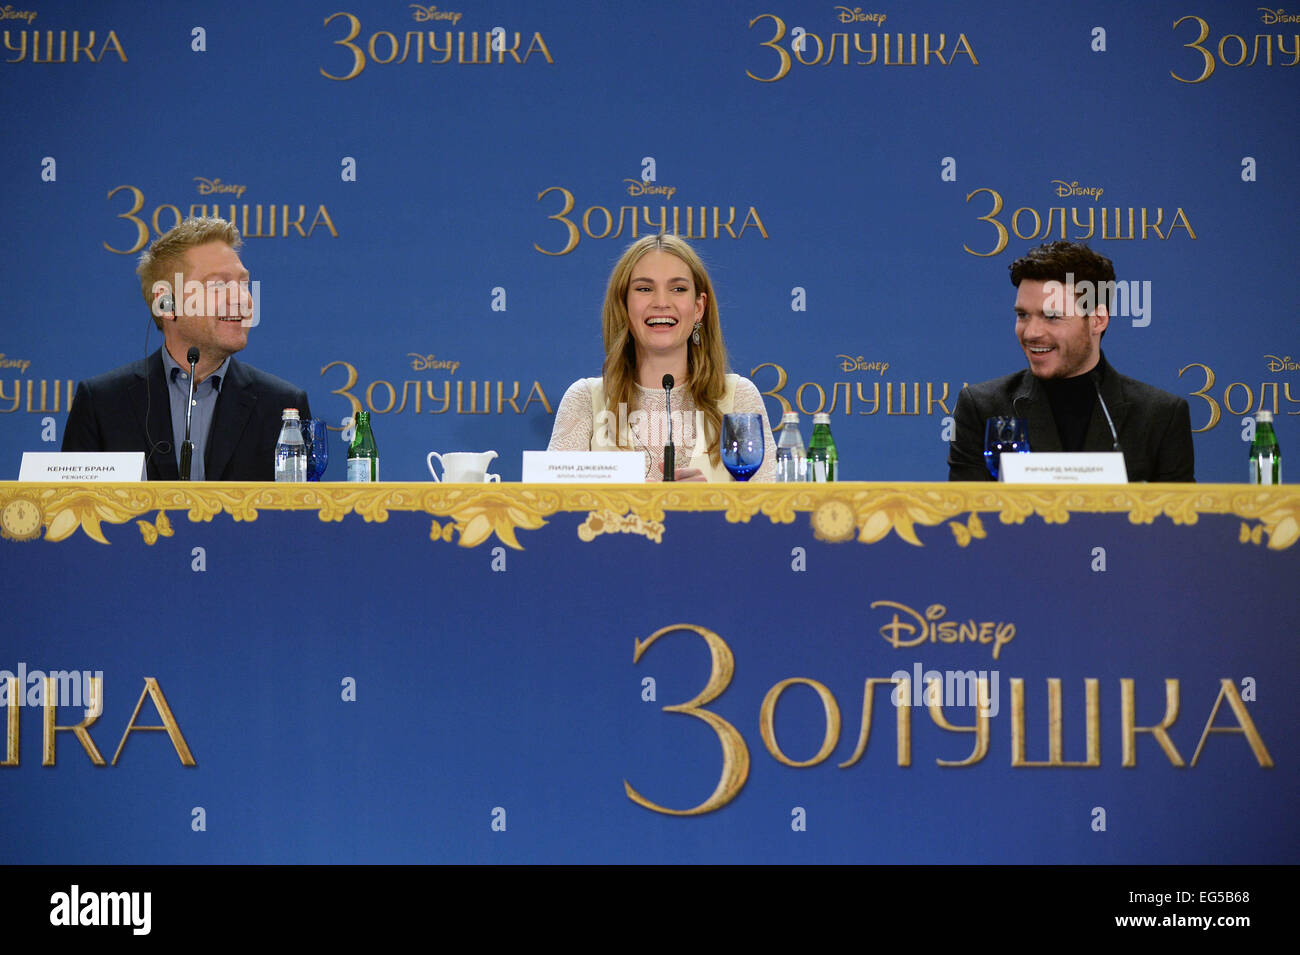 Moscow, Russia. 17th Feb, 2015. Director Kenneth Branagh, actress Lily James and actor Richard Madden (from L to R) attend a press conference during the premiere of Disney's new movie 'Cinderella' in Moscow, Russia, on Feb. 17, 2015. Credit:  Pavel Bednyakov/Xinhua/Alamy Live News Stock Photo